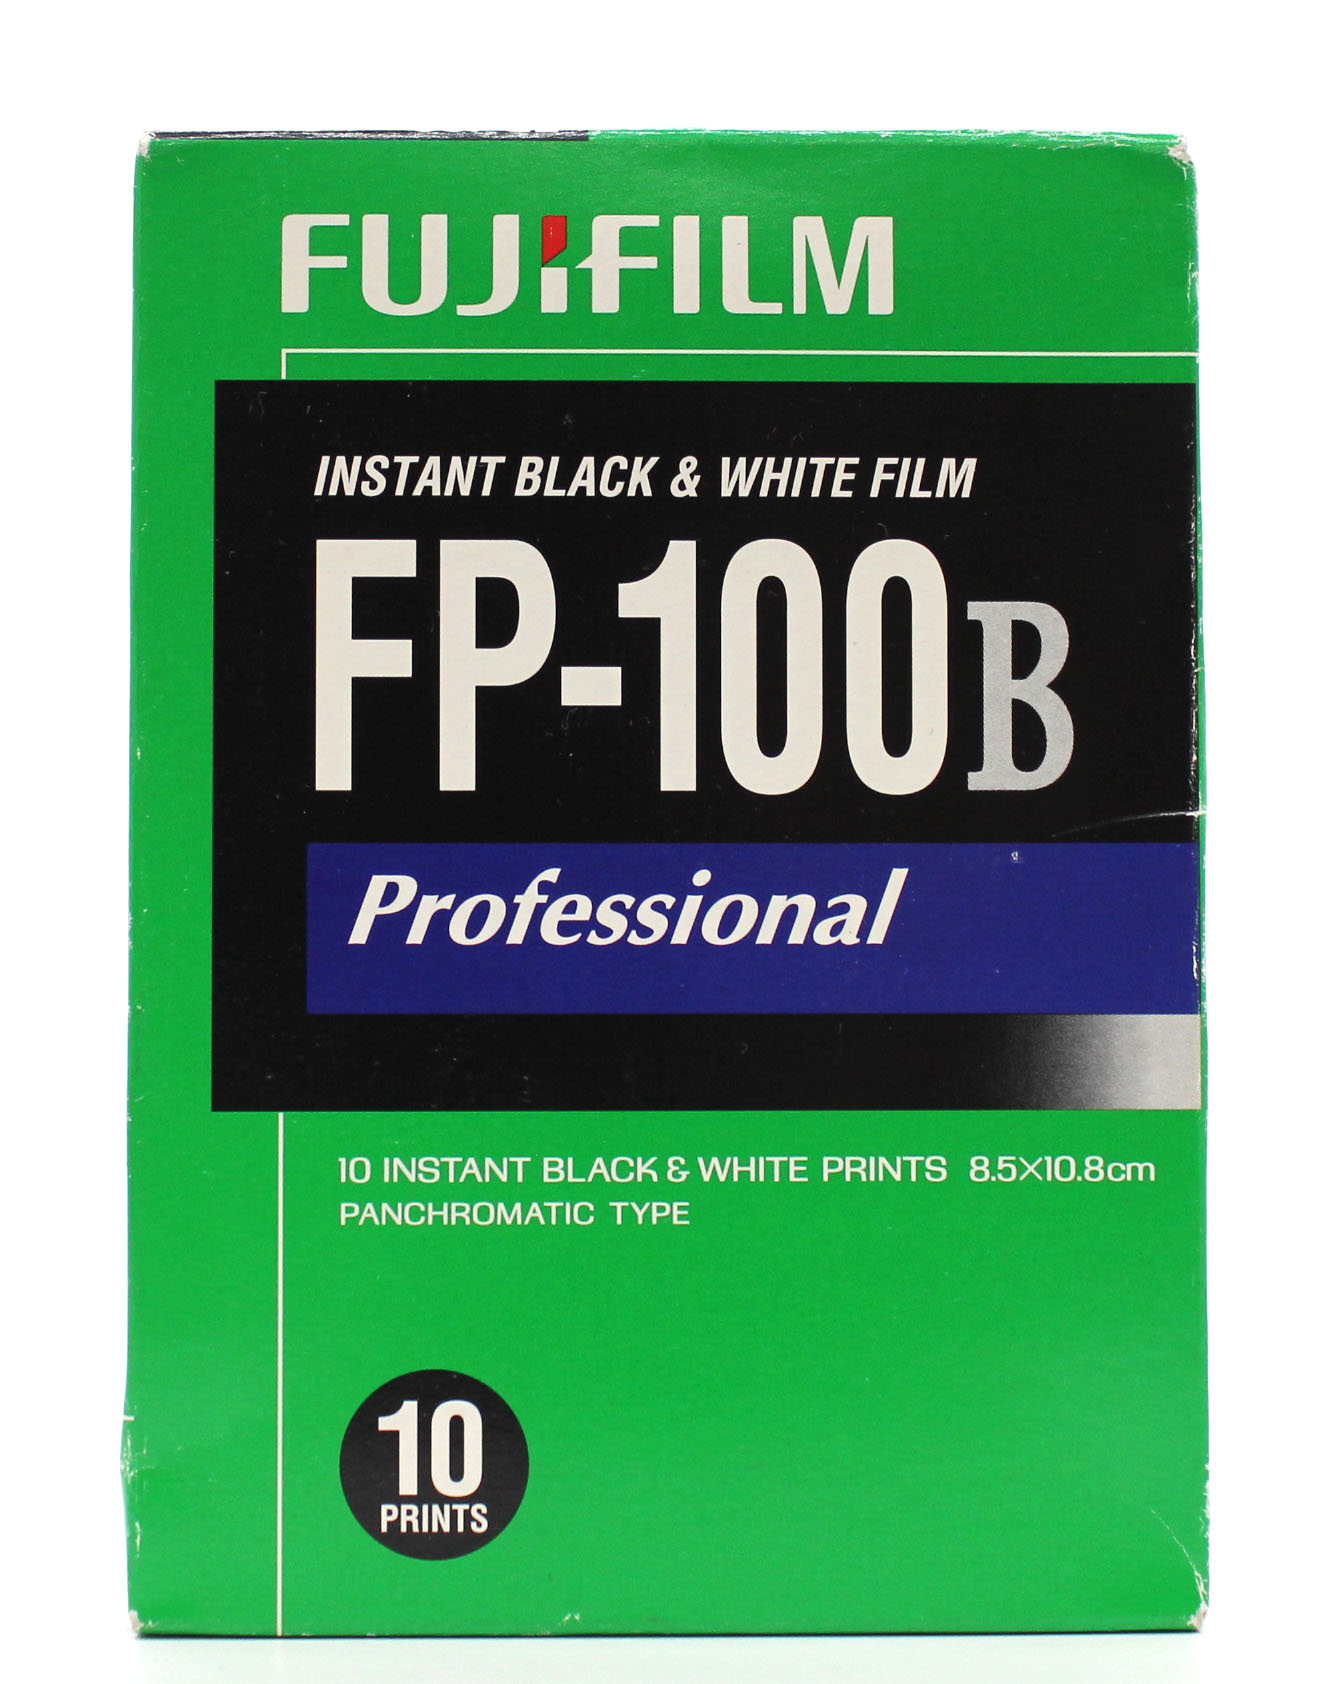 Japan Used Camera Shop | [New] Fujifilm FP-100B Professional Instant Black & White Film (Exp 2009) from Japan